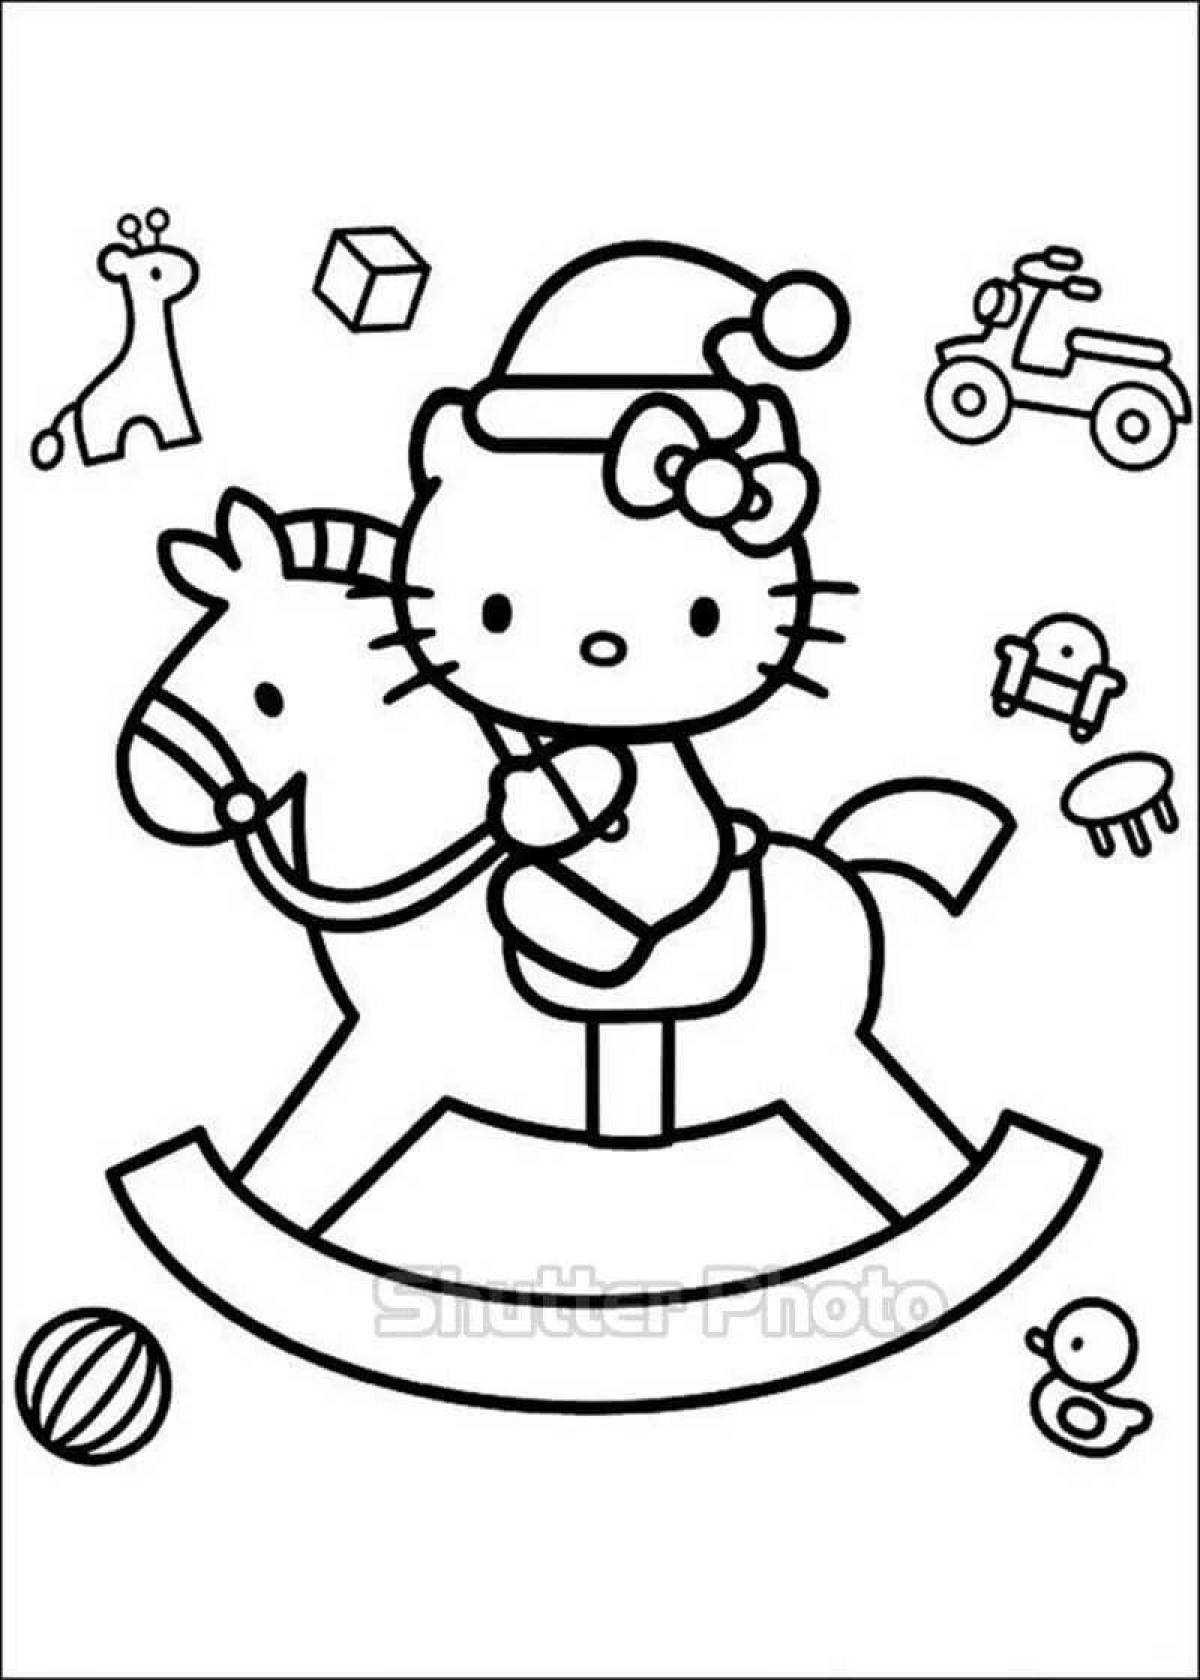 Kitty's gorgeous Christmas coloring book